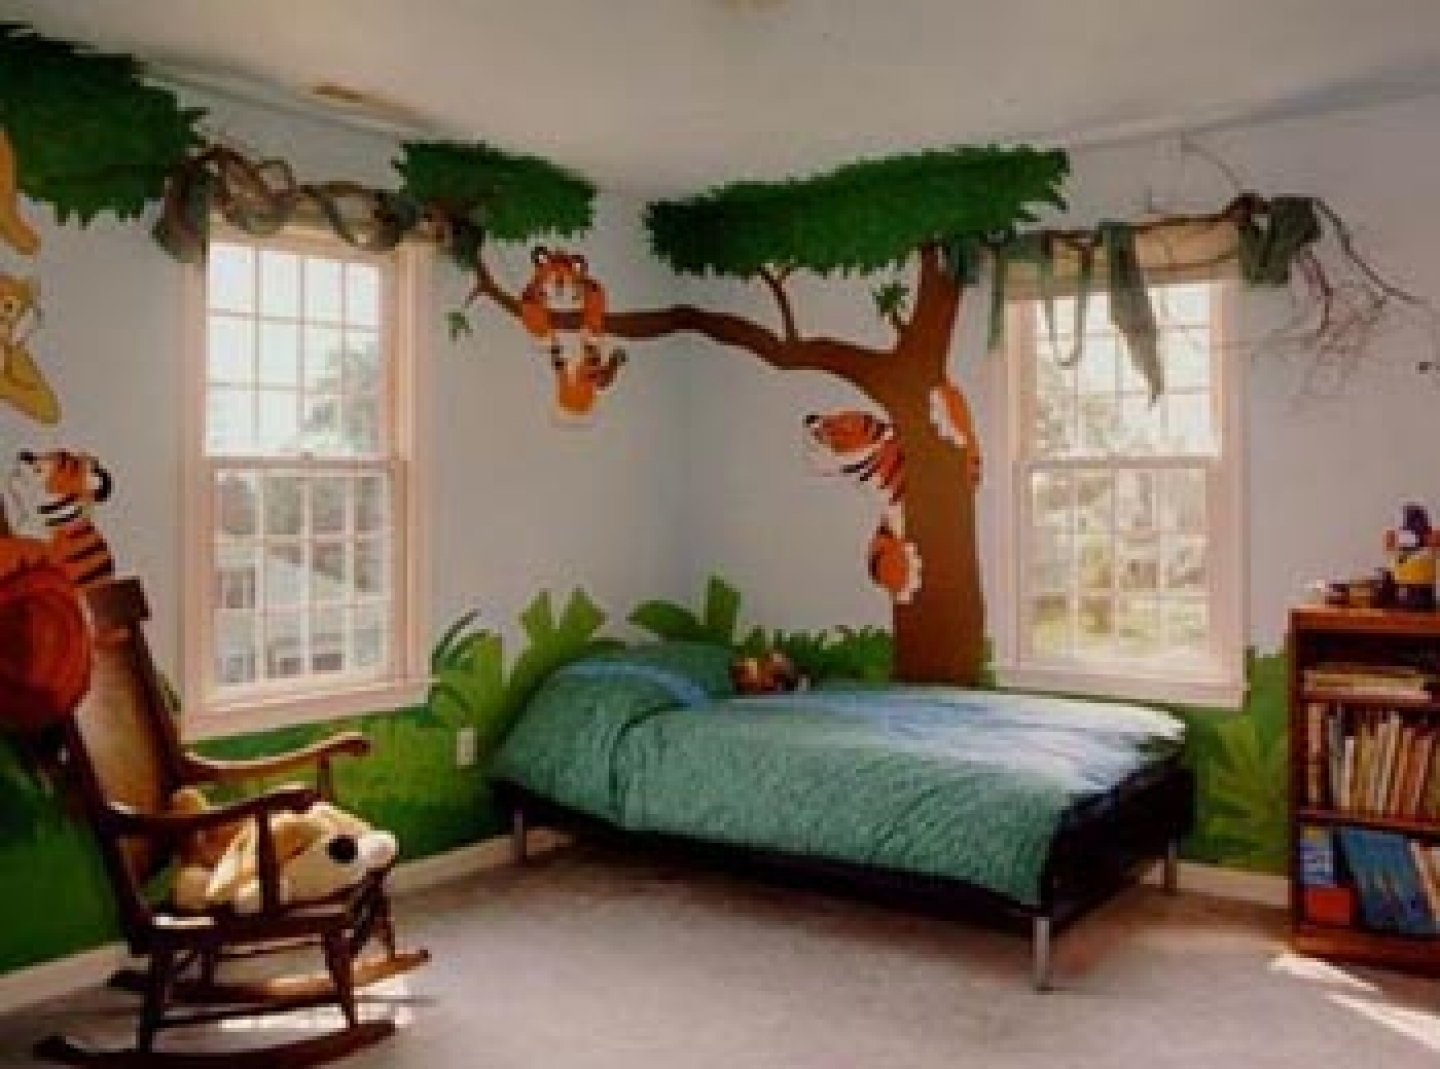 Wallpapers for kids rooms decor modern home design and decorating 1440x1069